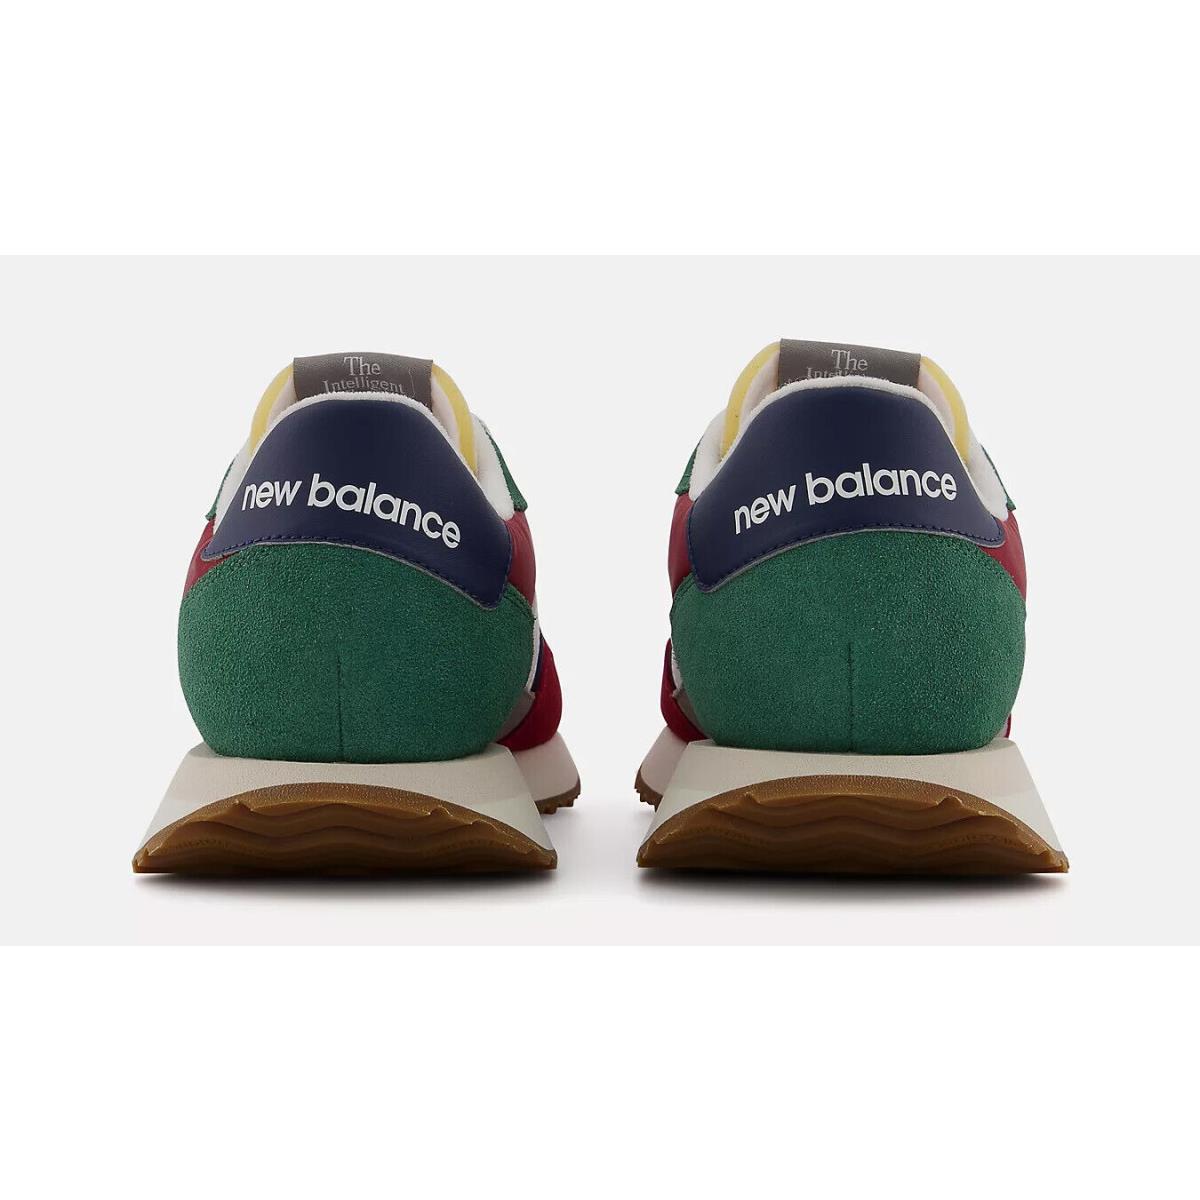 New Balance shoes  - Red/Green/Navy Blue 2